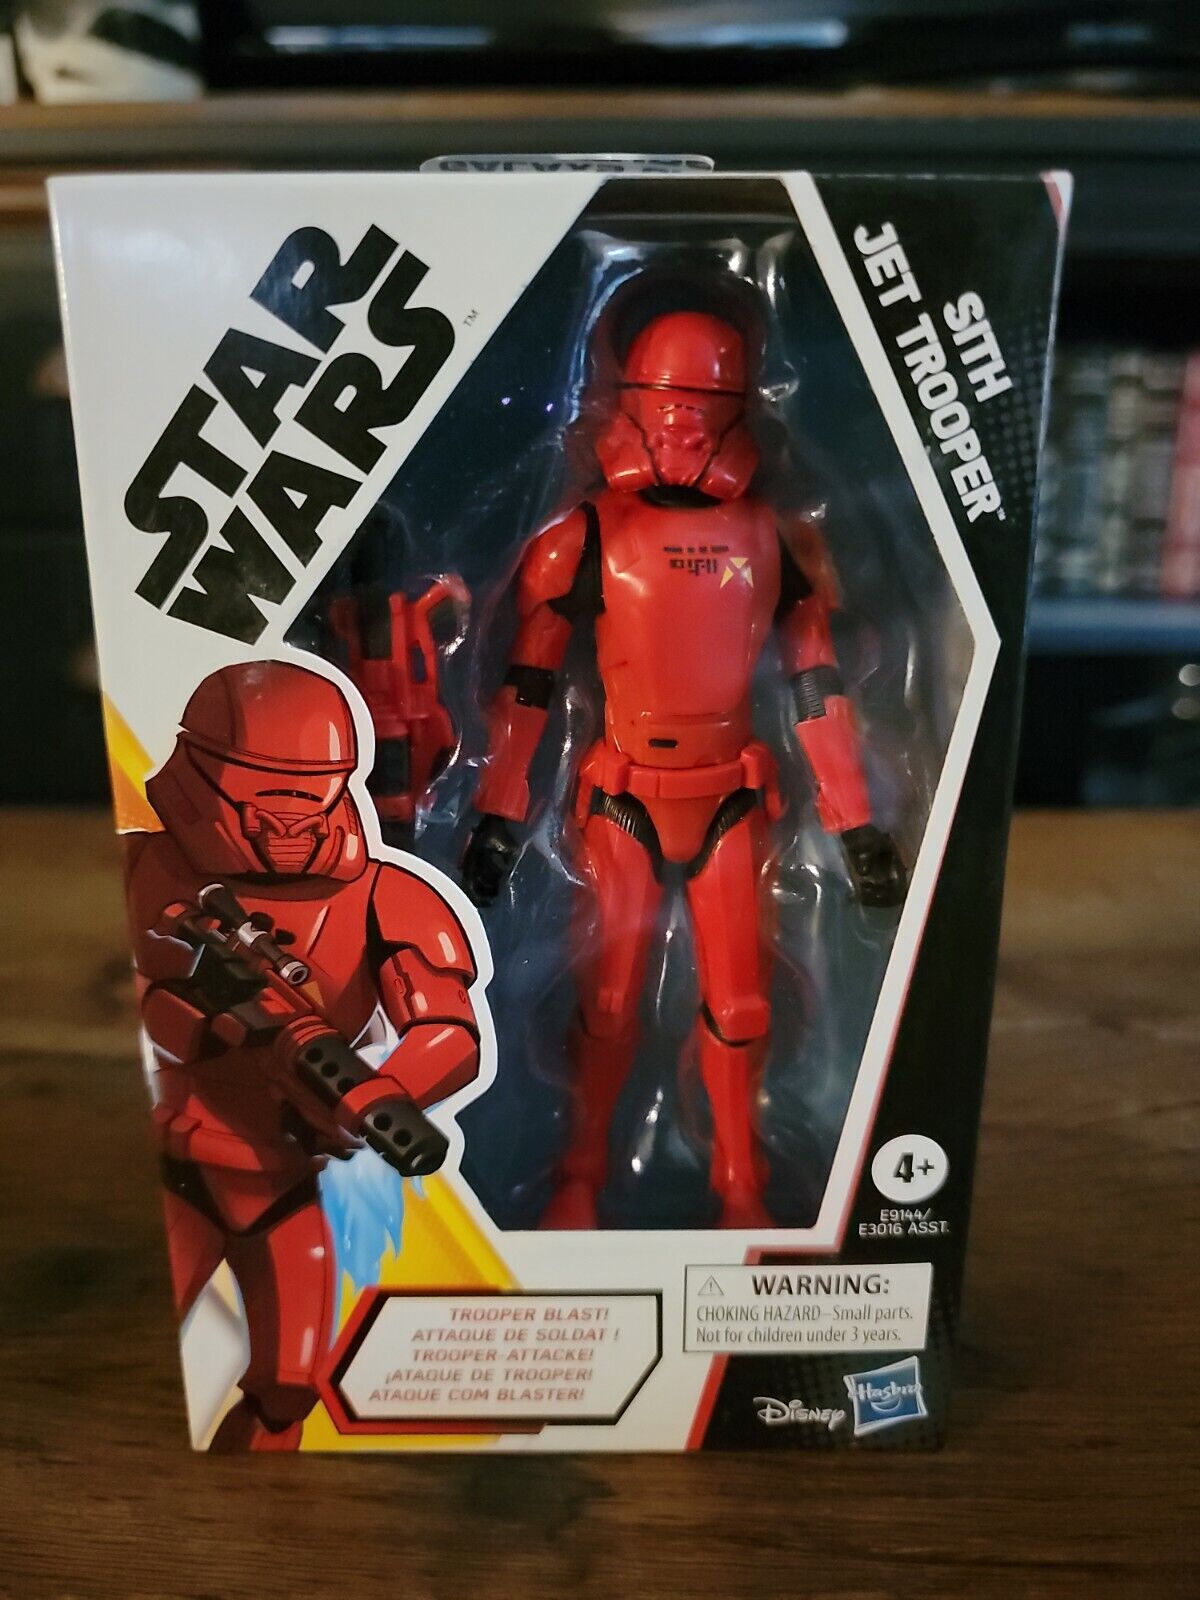 Star Wars Galaxy of Adventures Sith Jet Trooper Action Figure Disney Sealed New 